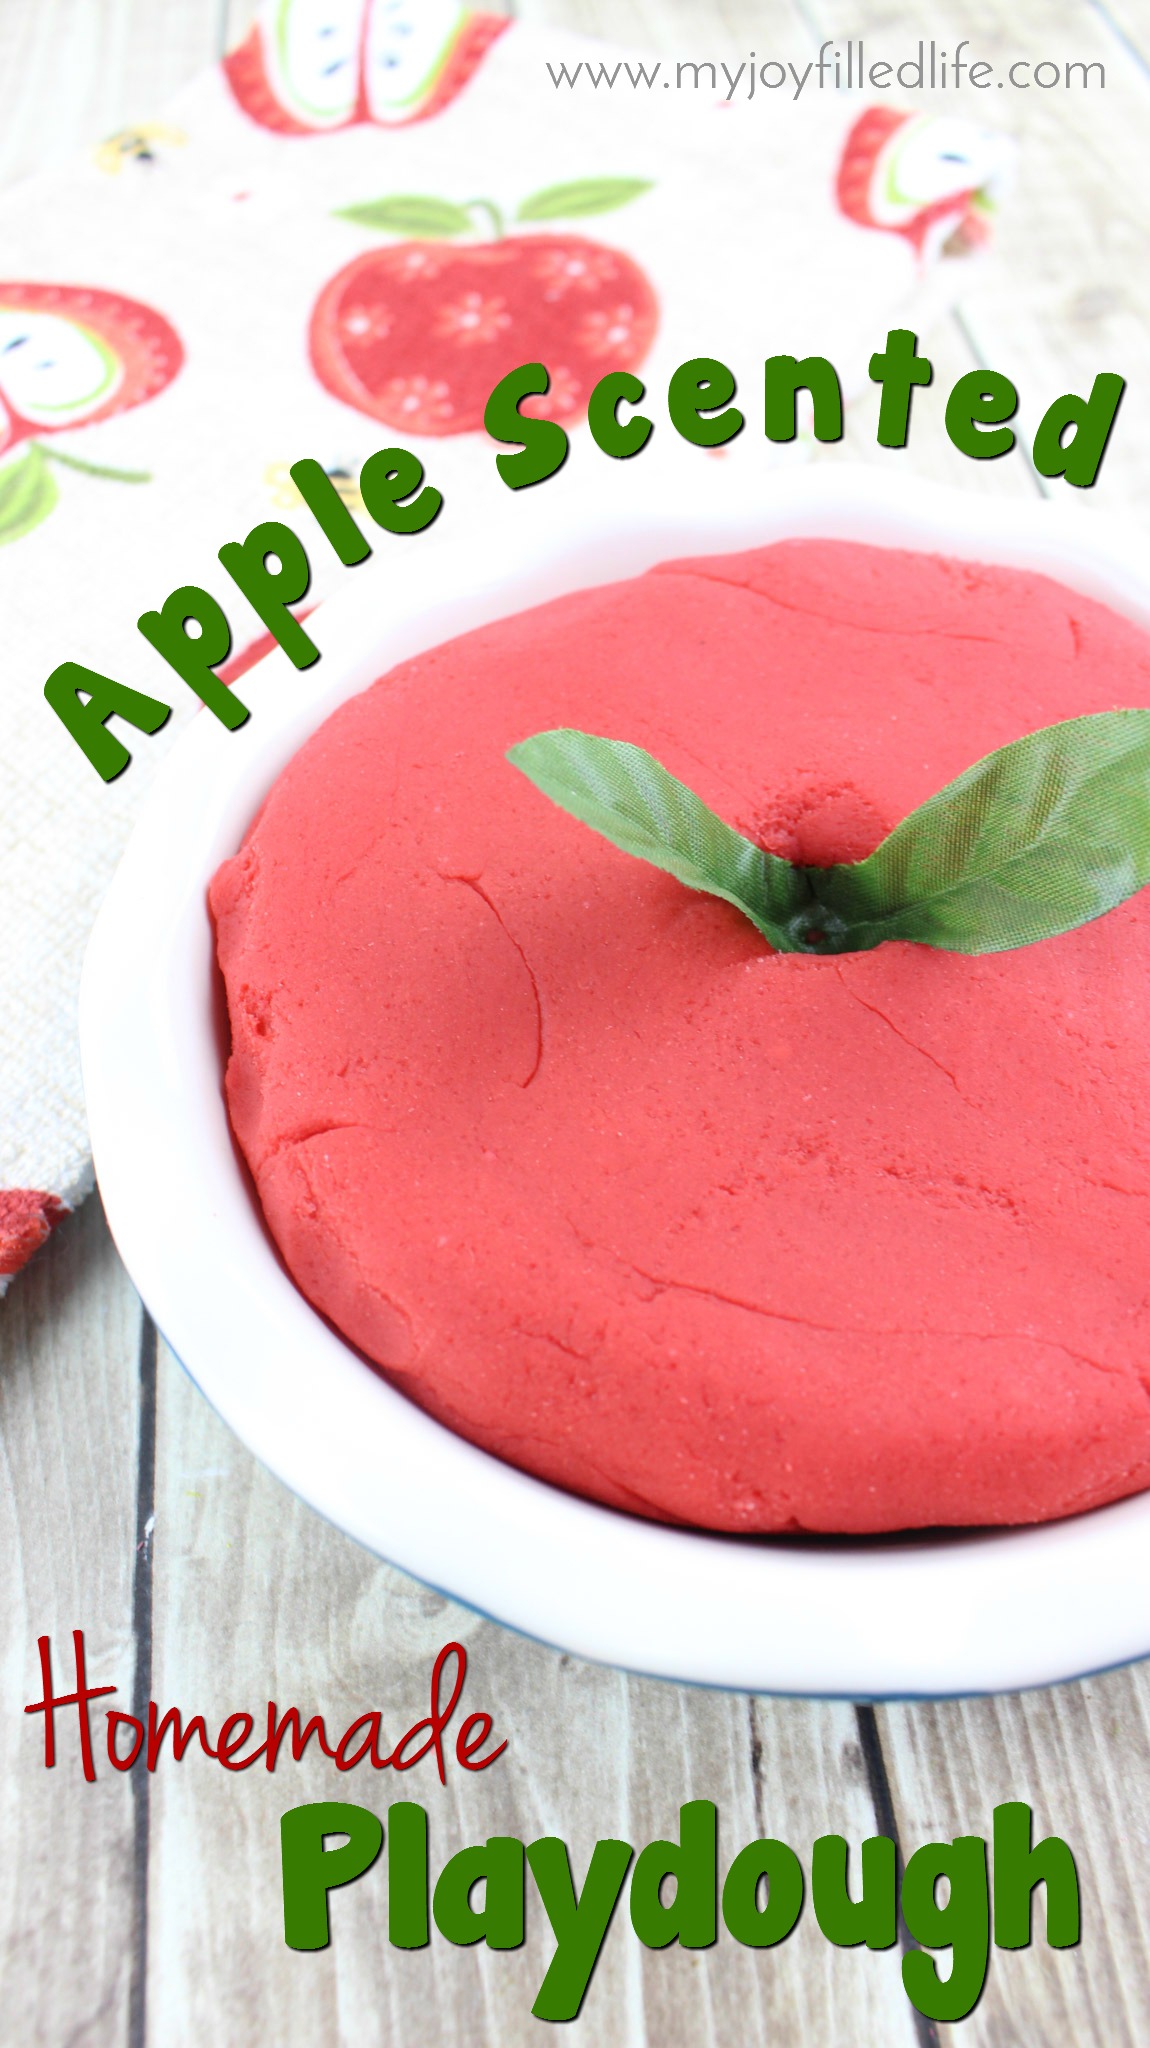 Enjoy the sweet, crisp aroma of apples with this easy to make homemade playdough. Be sure to check out the fun apple playdough activity suggestions at the bottom of the post too! #apples #homemadeplaydough #playdough